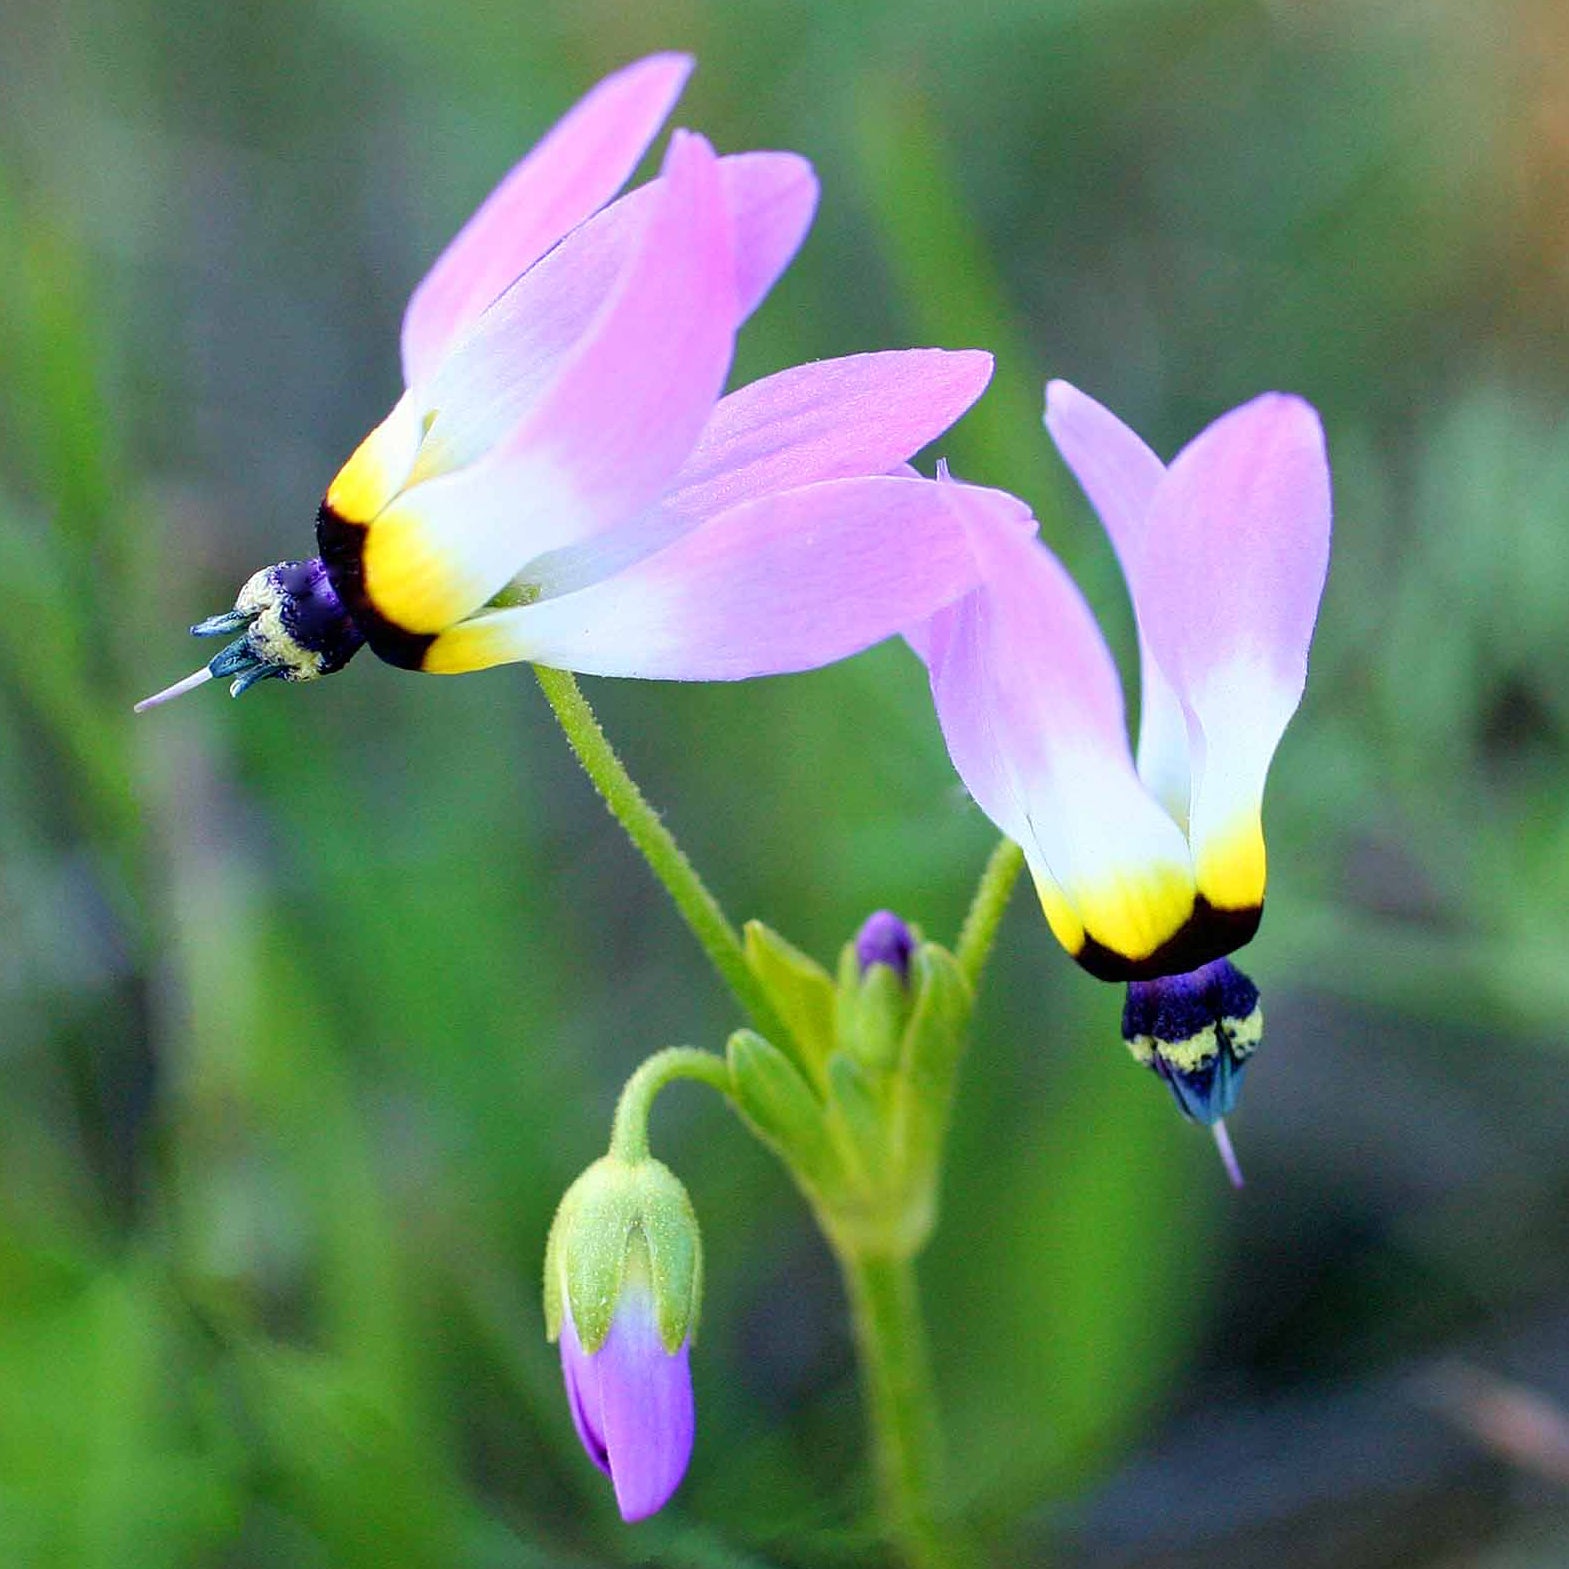 Shooting Star flowers in the Georgia wildflower seed mix